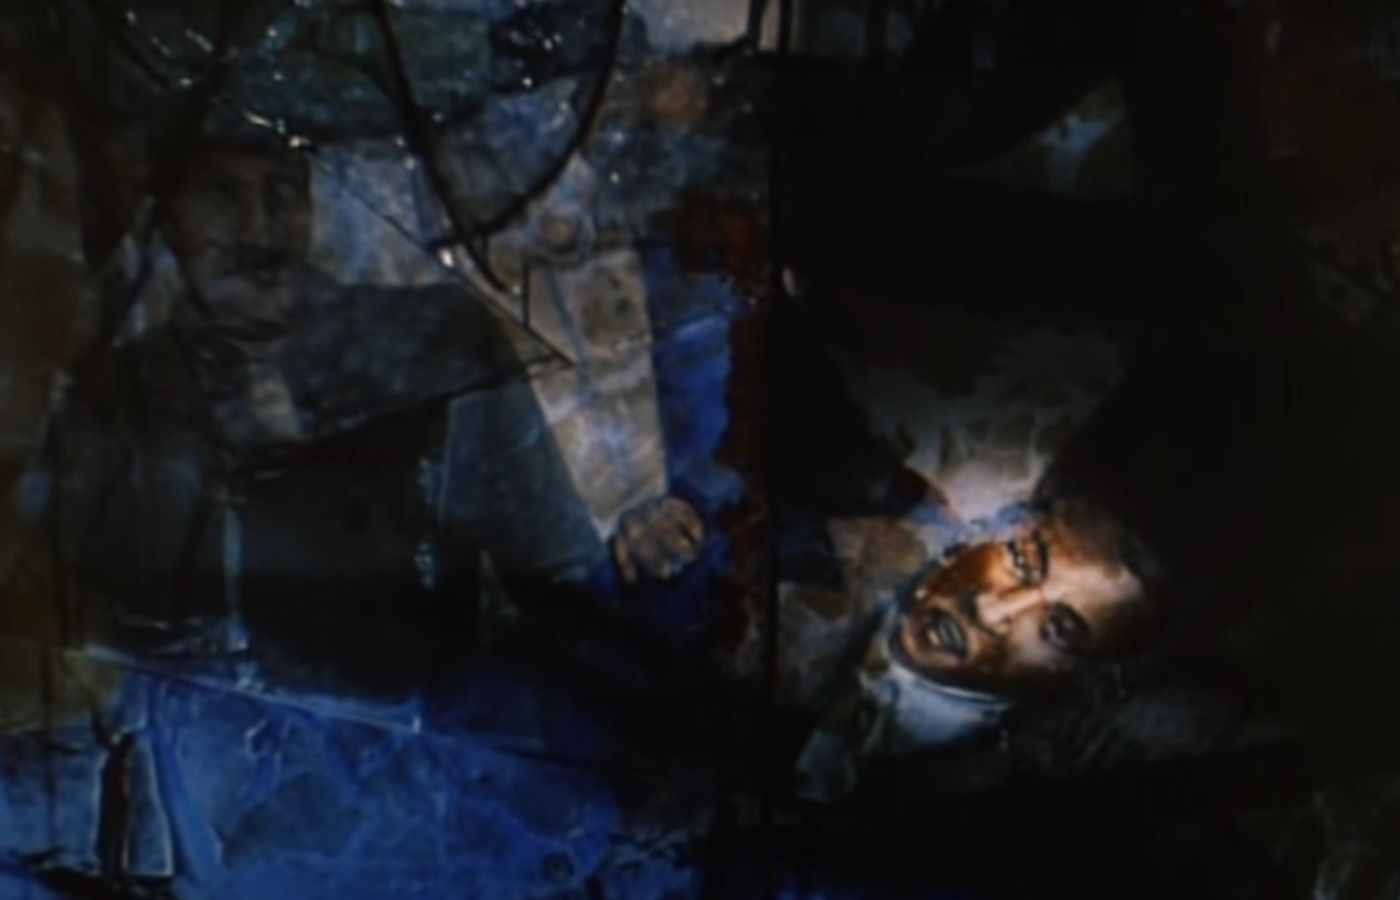 Artwork featured in Candyman, 1992, portraying the urban legend of the killer.